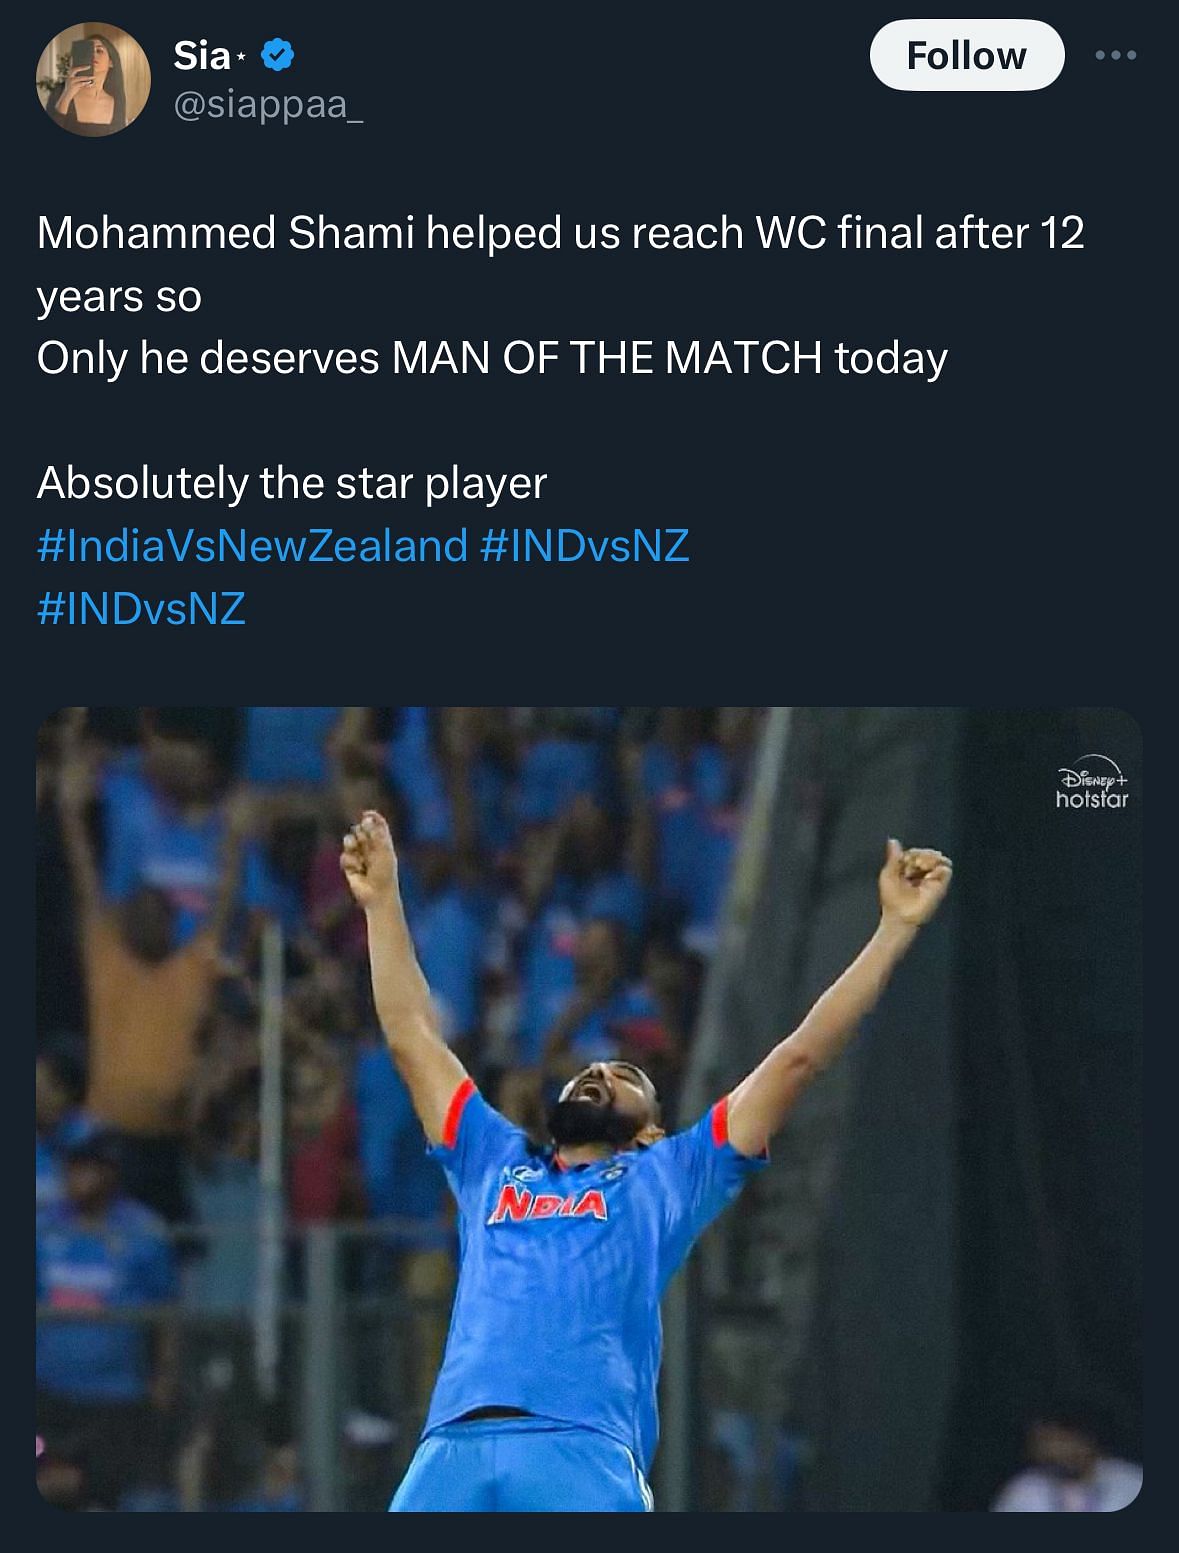 #CWC23 #INDvsNZ| Mohammed #Shami's scintillating seven wickets against New Zealand made him enter the hall of fame.